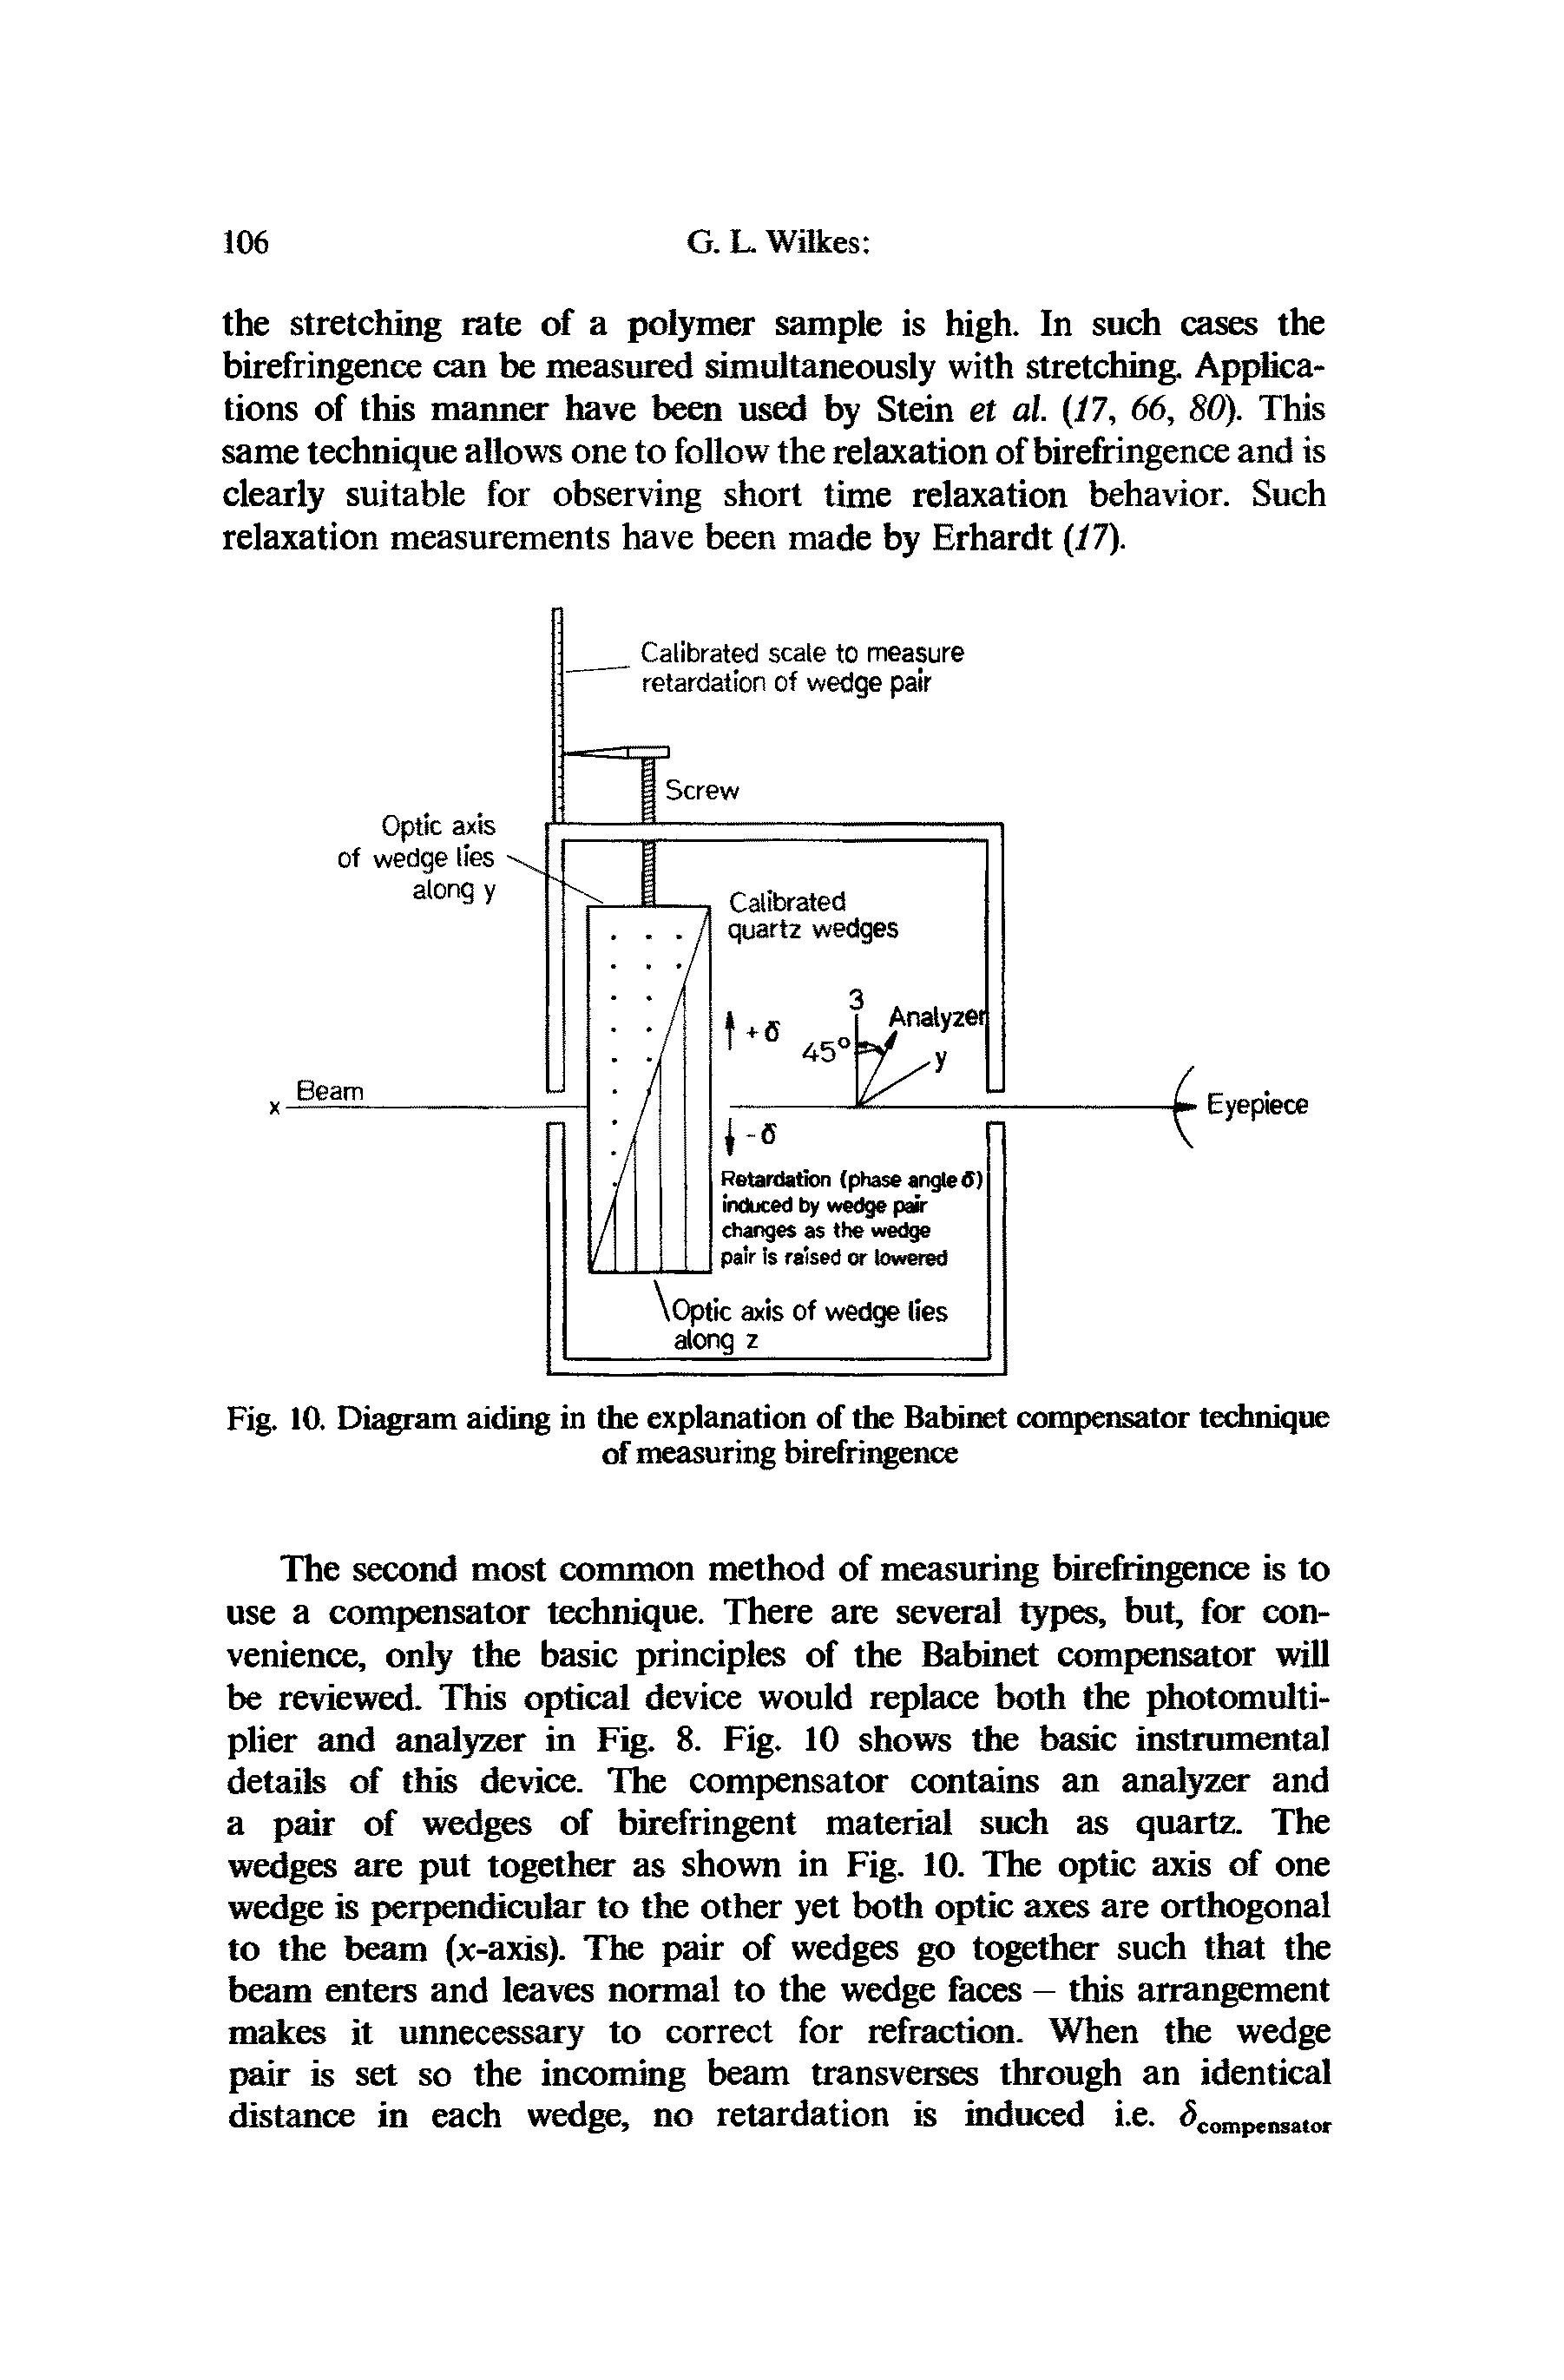 Fig. 10. Diagram aiding in the explanation of the Babinet compensator technique of measuring birefringence...